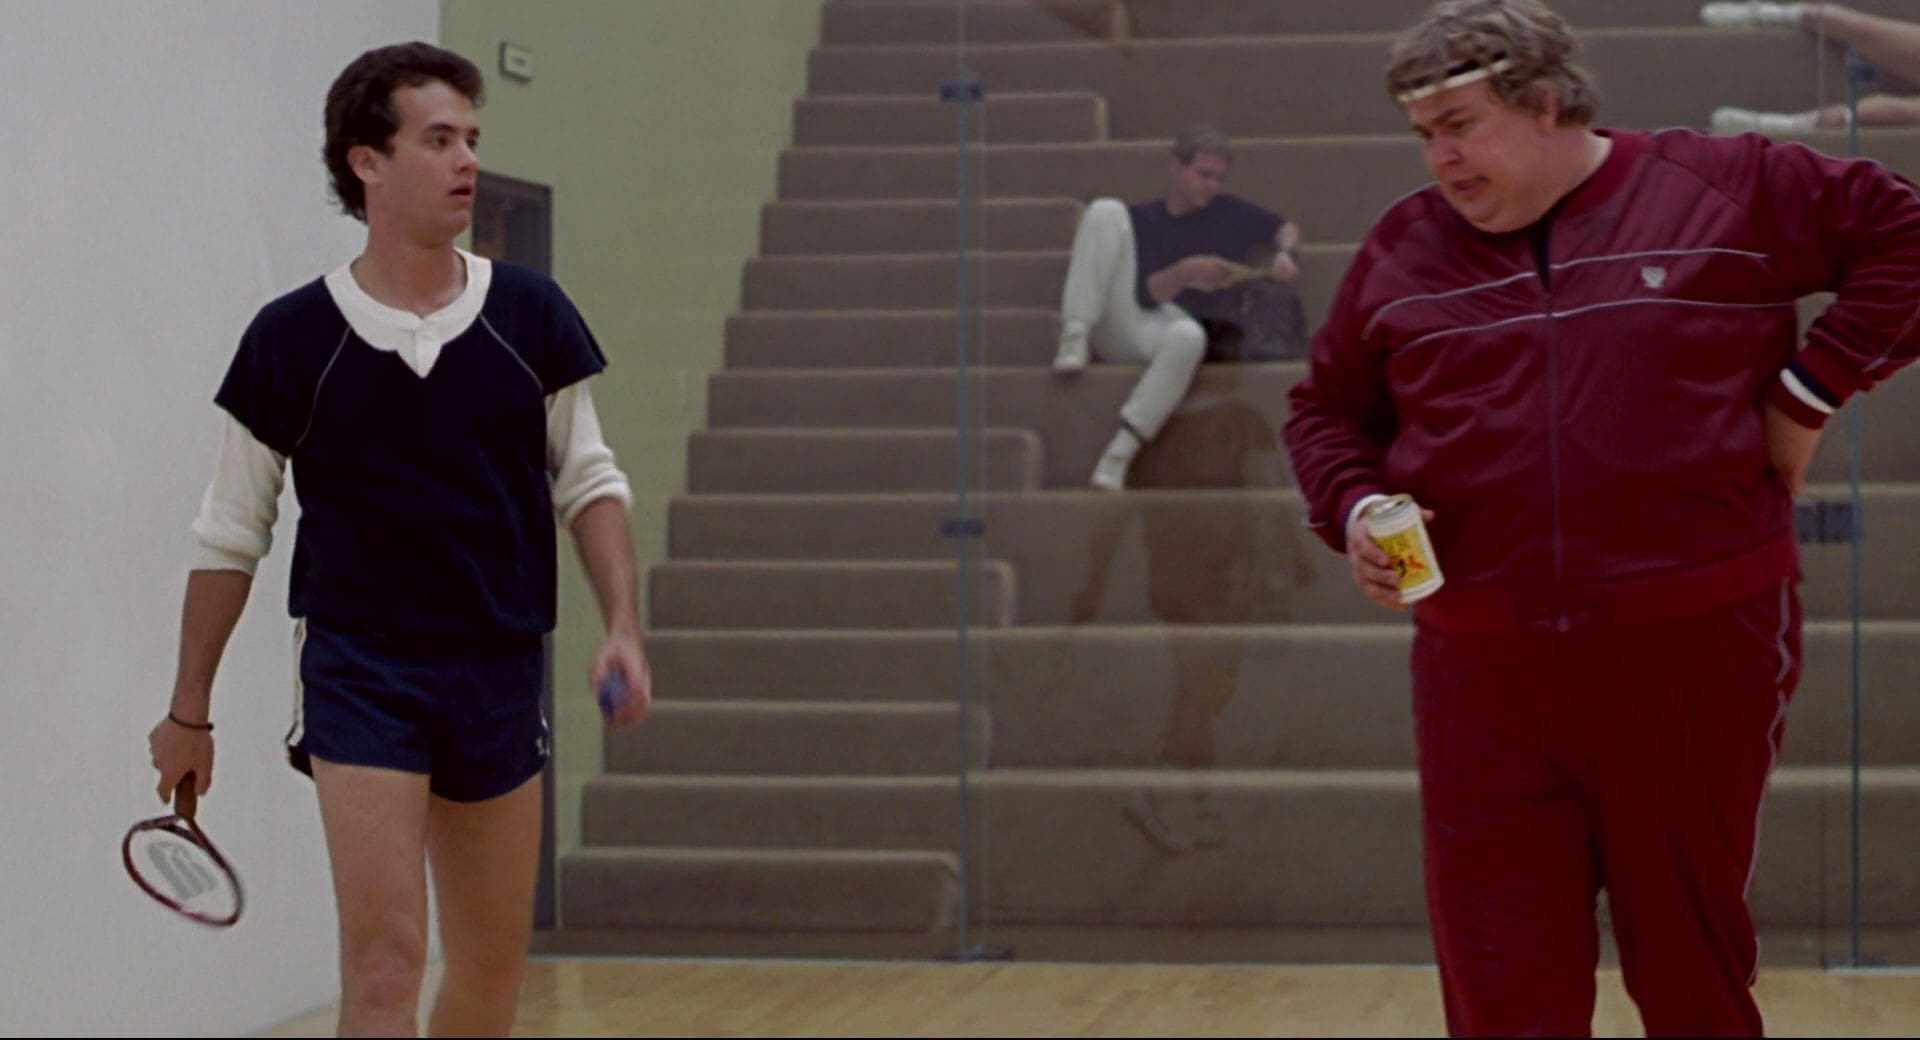 Two men are standing in a gym with one of them holding onto a drink.